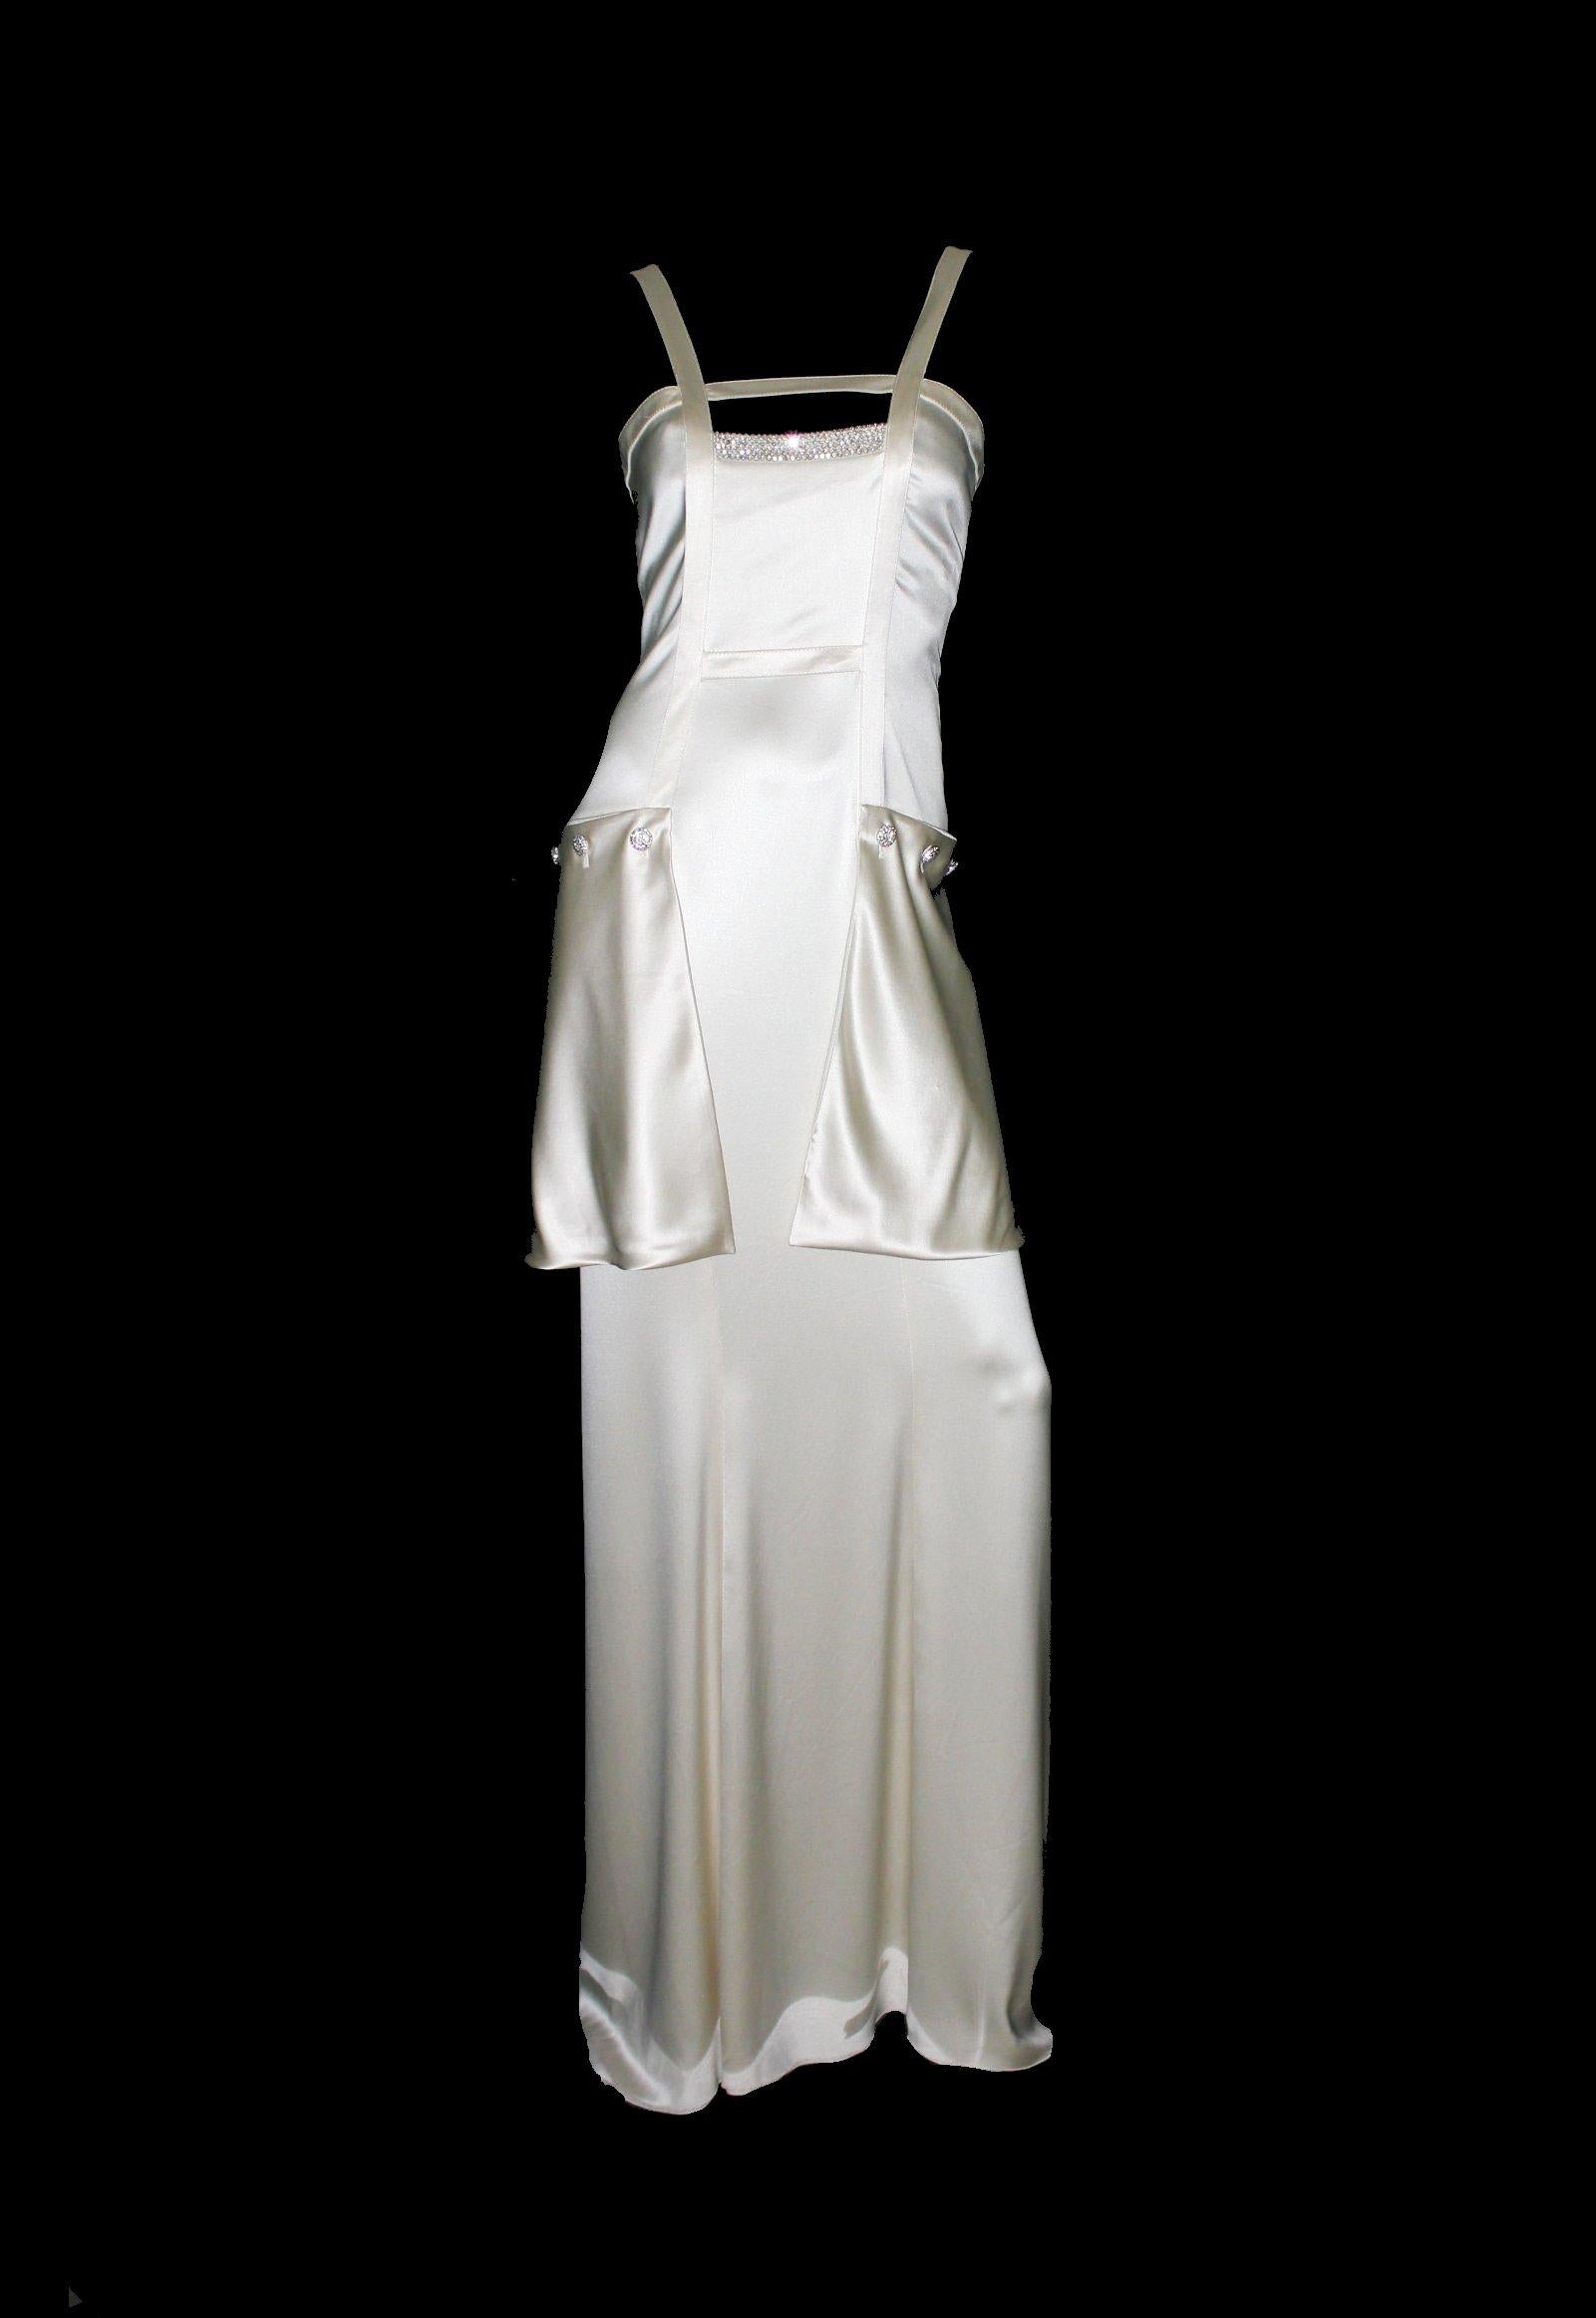 INCREDIBLE

VALENTINO 

GRECIAN GODDESS IVORY SILK & CRYSTALS EVENING GOWN

Gorgeous off-white evening gown inspired by the Grecian goddesses by VALENTINO
From the famous FW 2004 collection
Created by designer Valentino Garavani himself
Sexy cutout